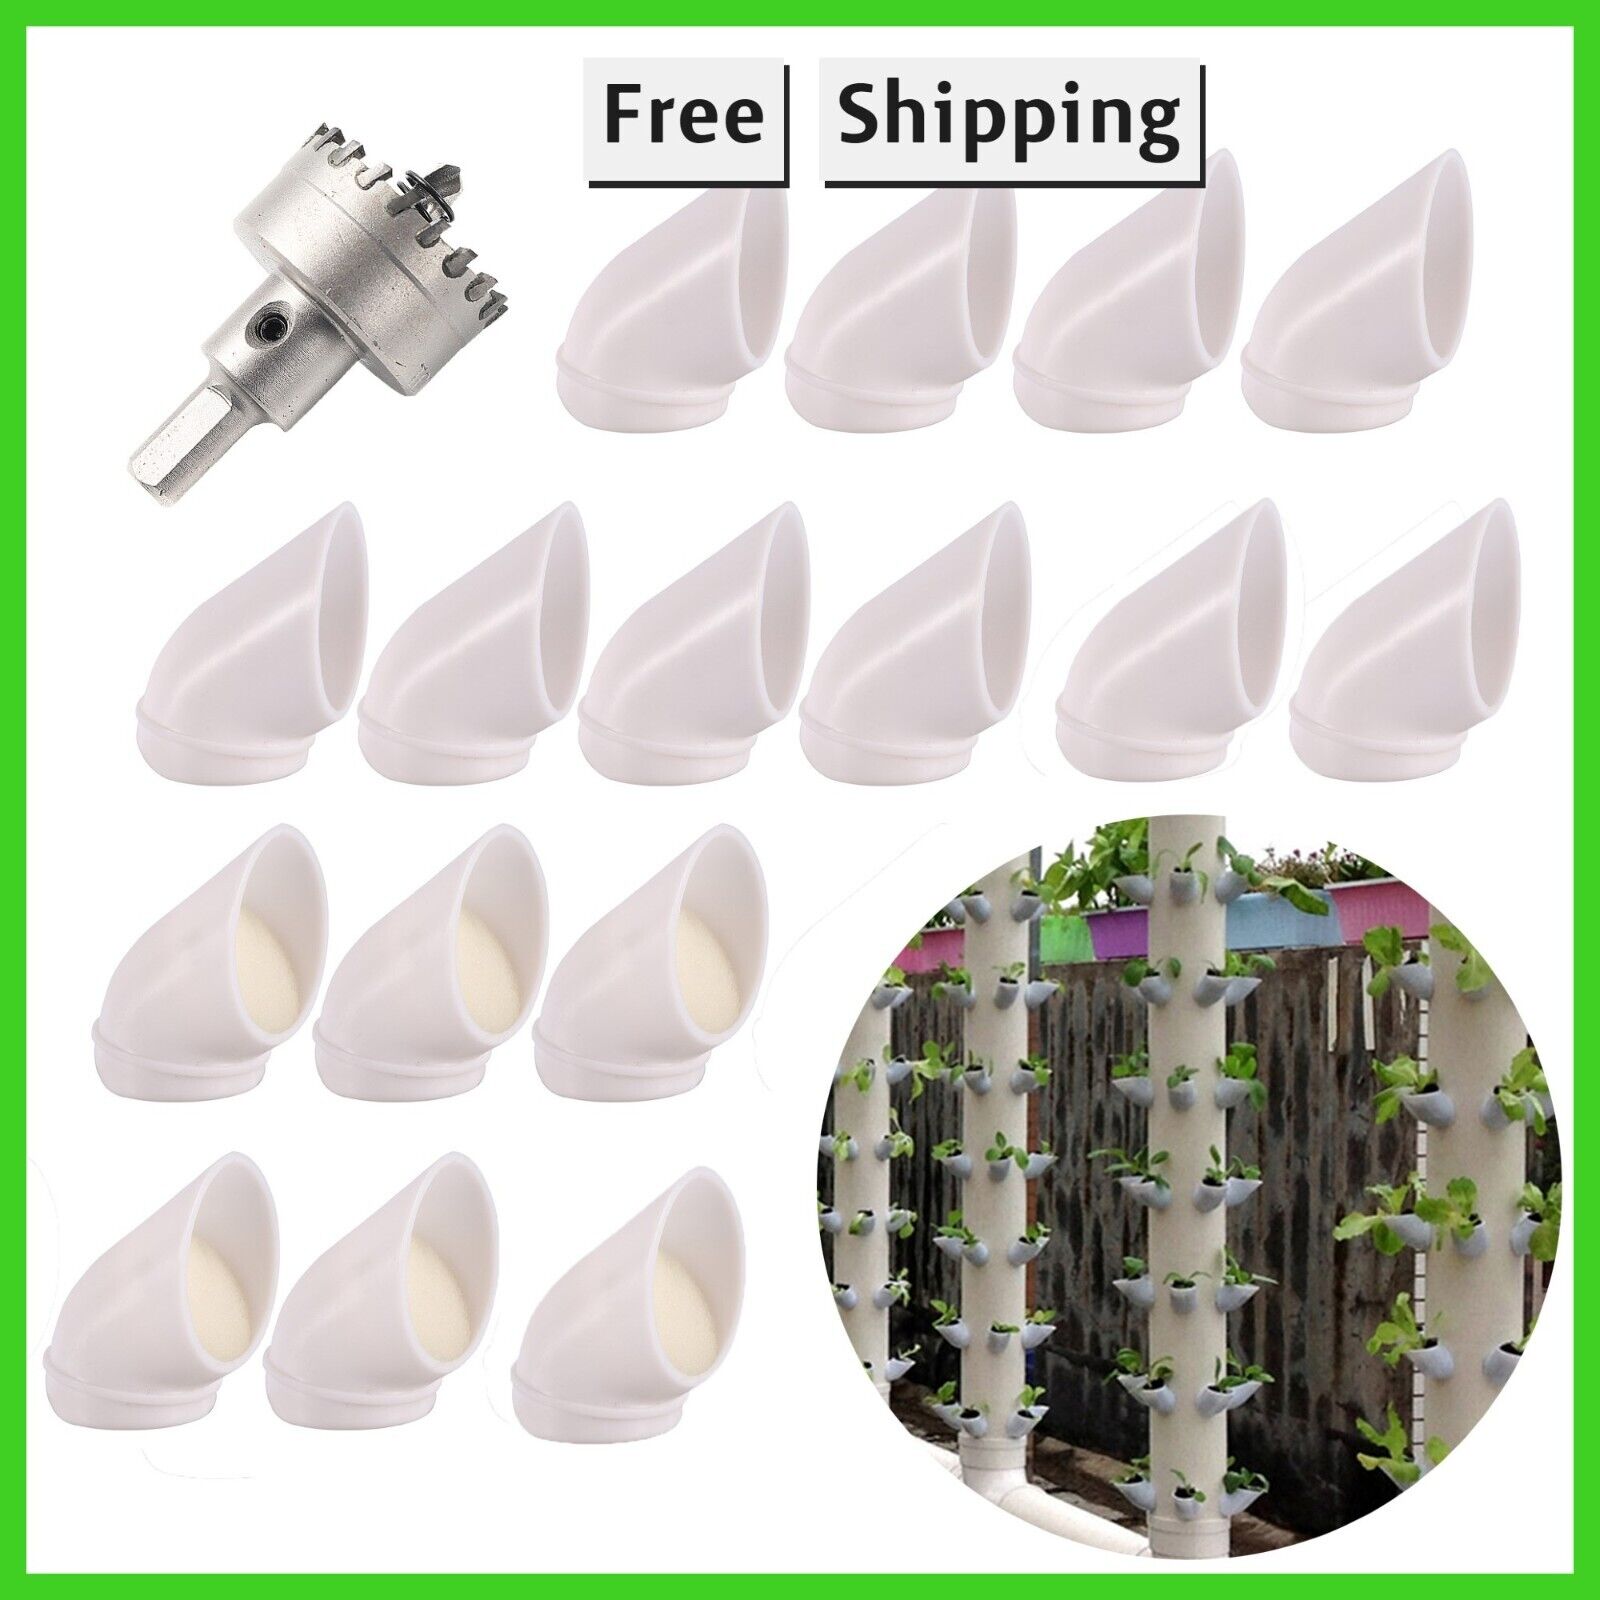 30Pcs DIY Hydroponic Pots for Vertical Tower Growing System Soilless Device Farm